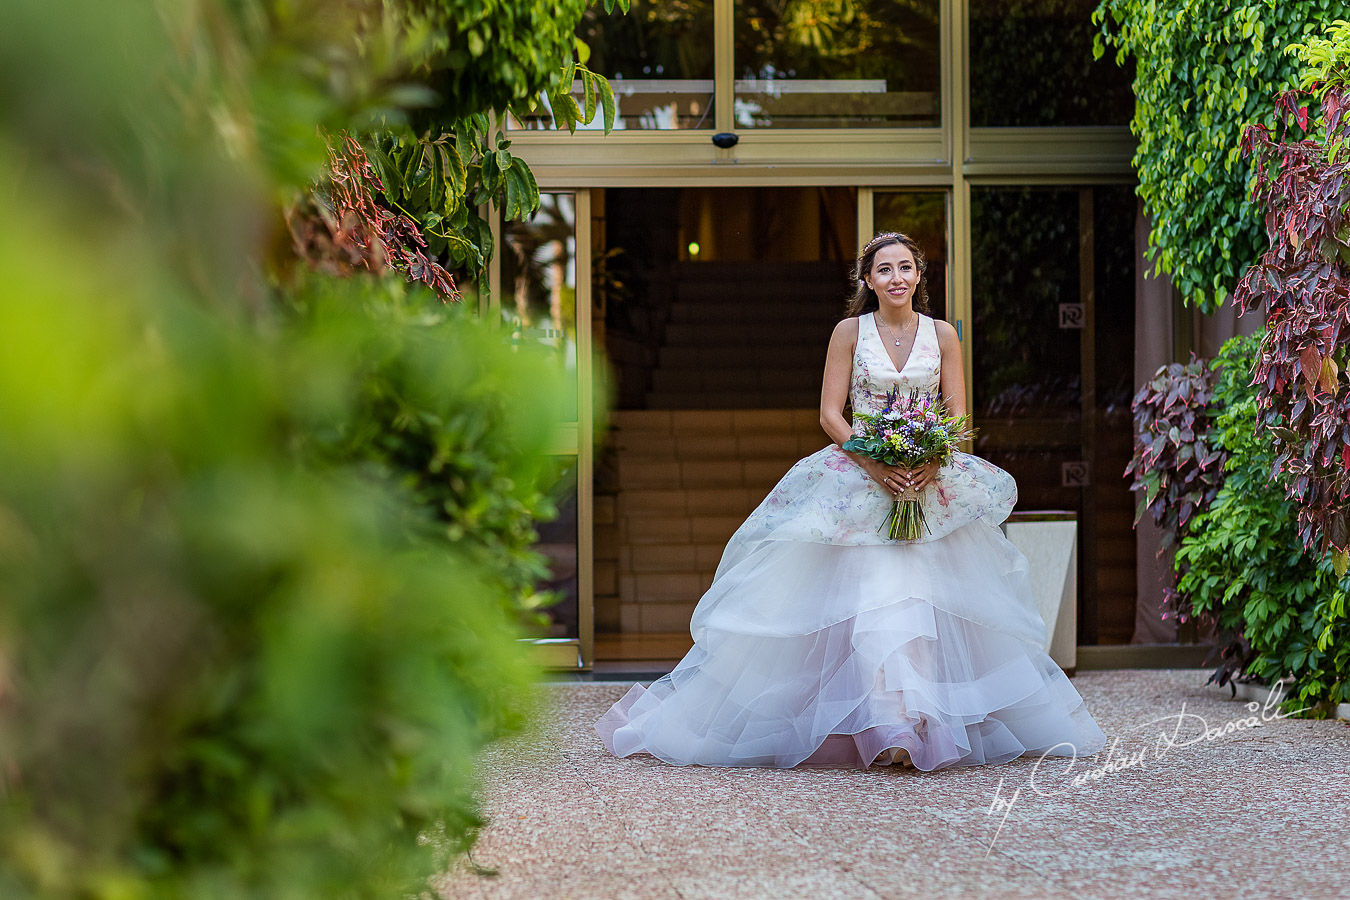 The bride coming down the isle photographed during the ceremony, as part of an Exclusive Wedding photography at Grand Resort Limassol, captured by Cyprus Wedding Photographer Cristian Dascalu.